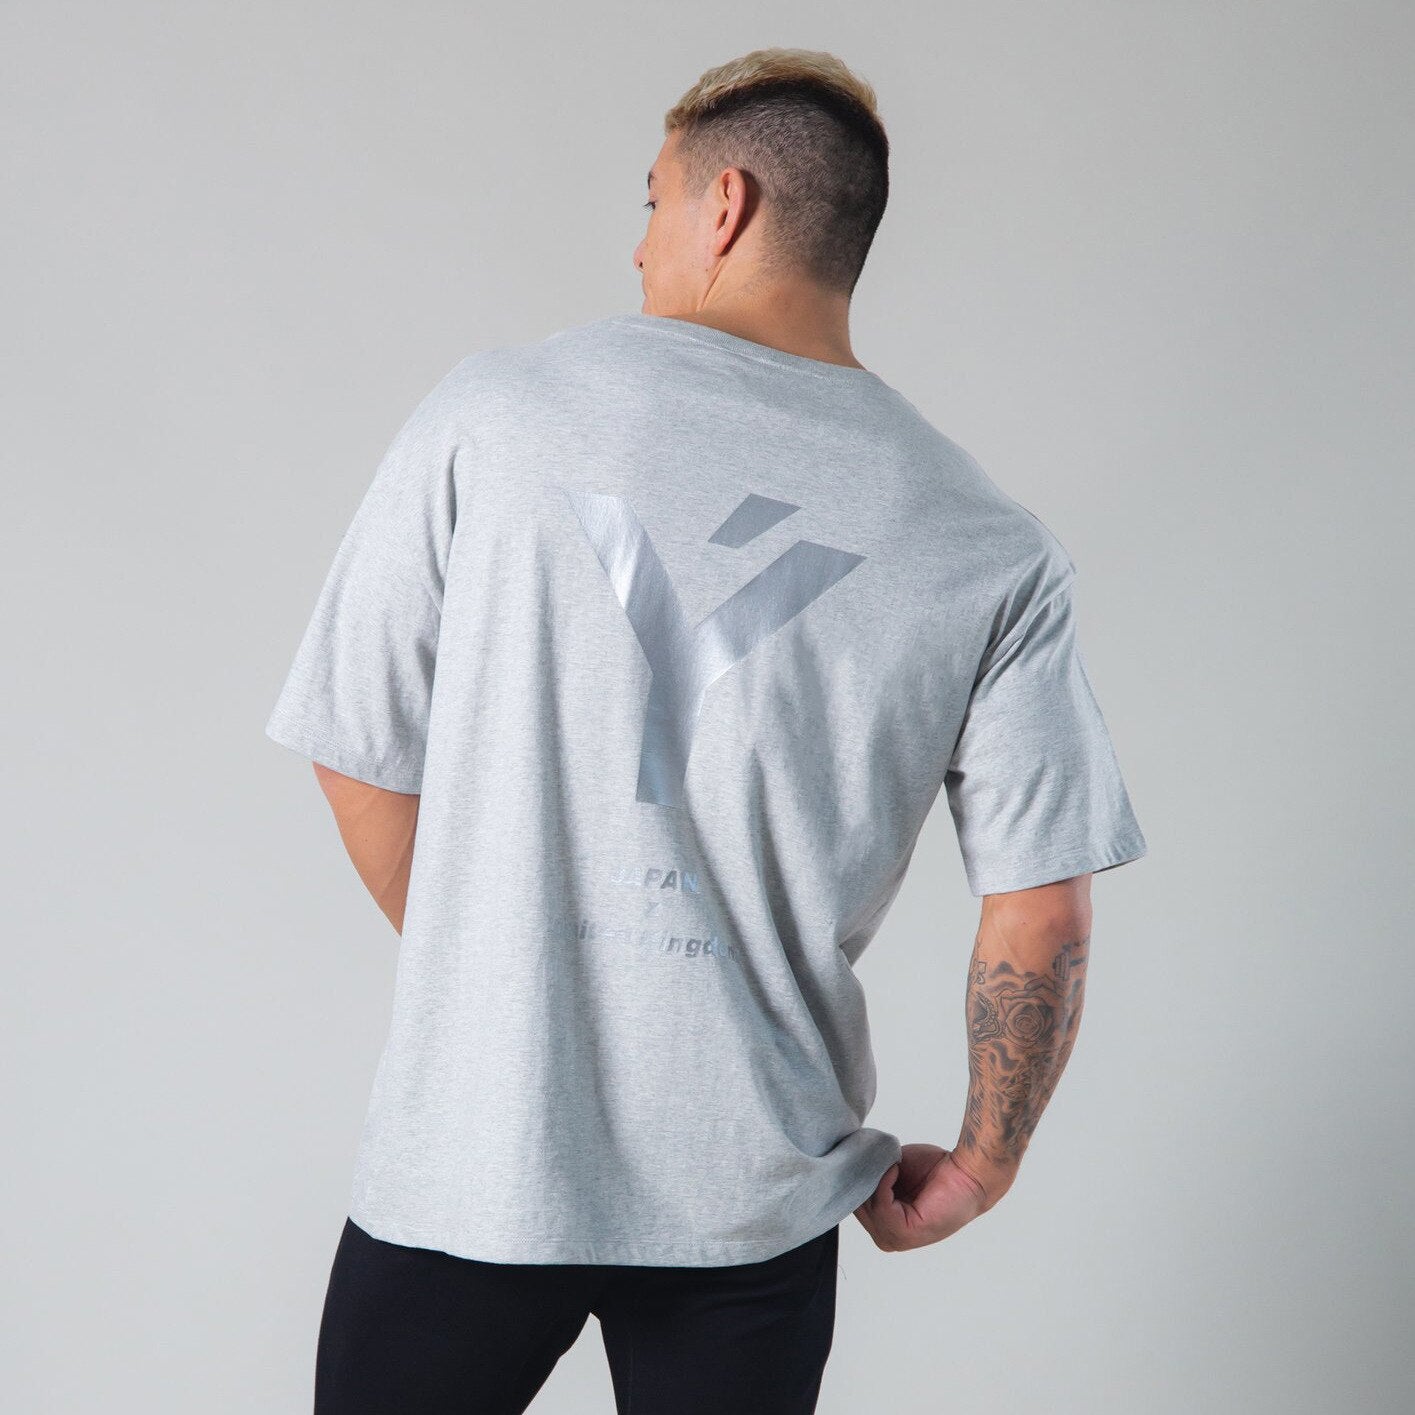 New Round Neck Cotton Men's Short-Sleeved Summer Fitness T-Shirt Fashionable Back Print Short-Tees Solid-Color Half-Sleeved Top